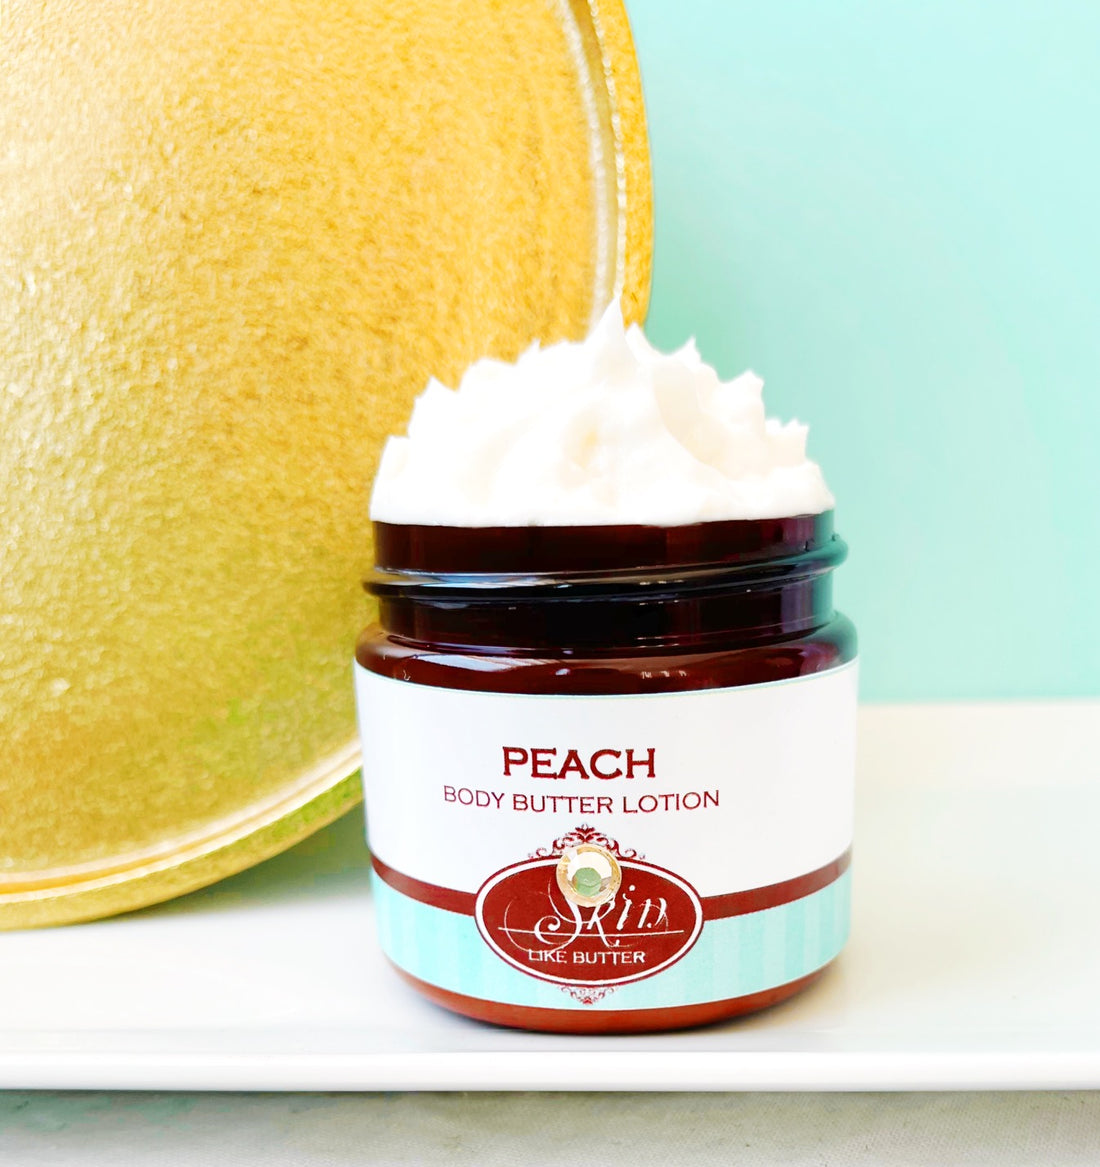 PEACH scented water free, vegan non-greasy Skin Like Butter Body Butter